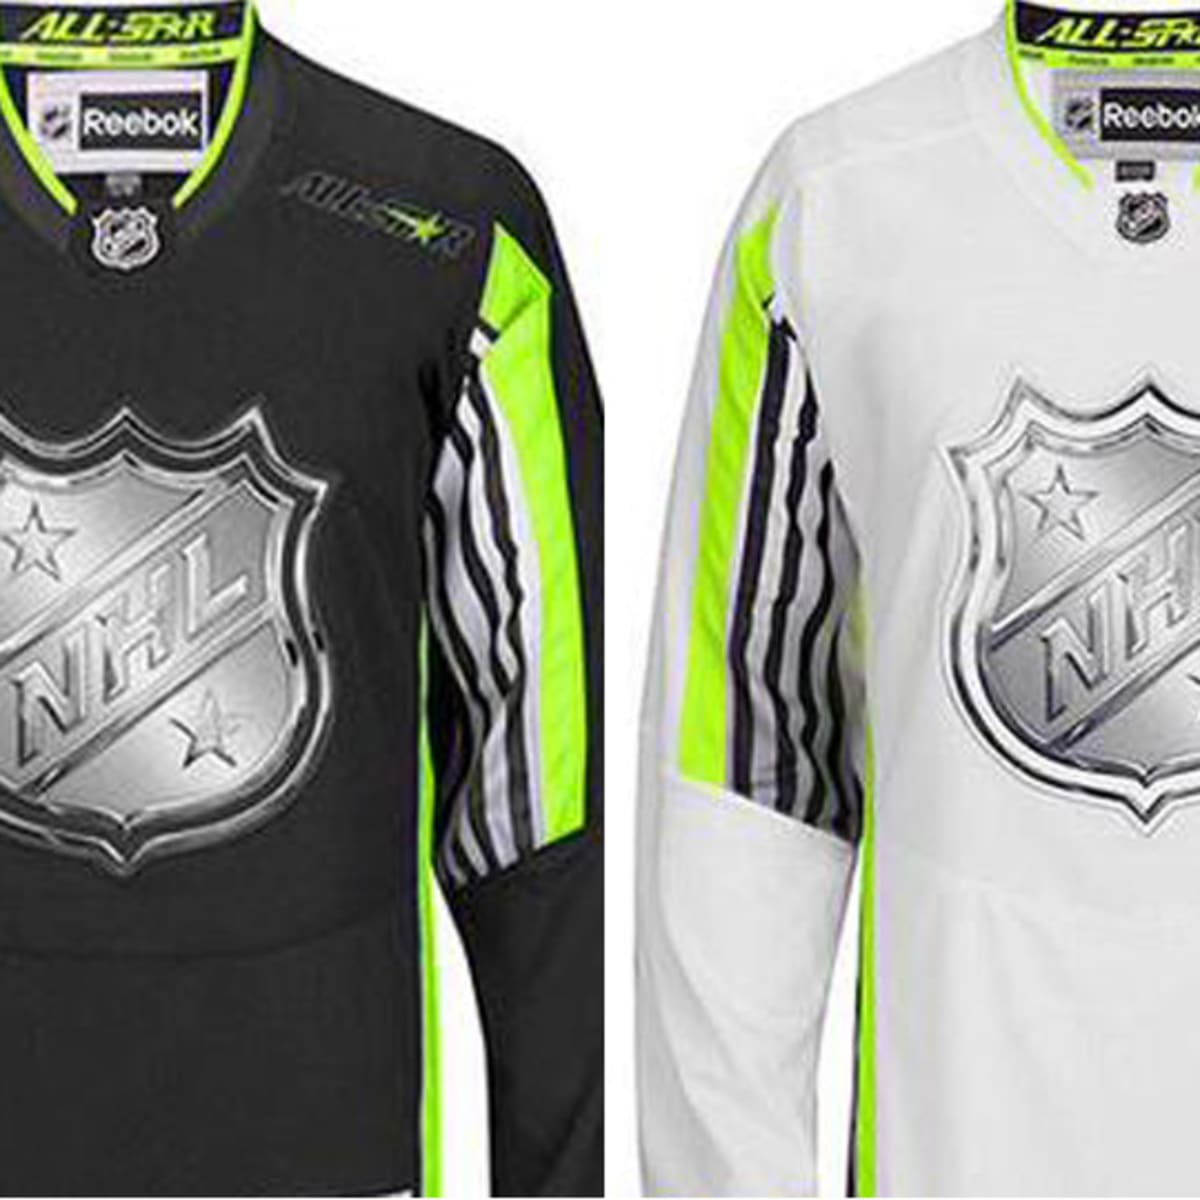 NHL All-Star Game 2015 jerseys: 'Elite green' for hockey's elite players 